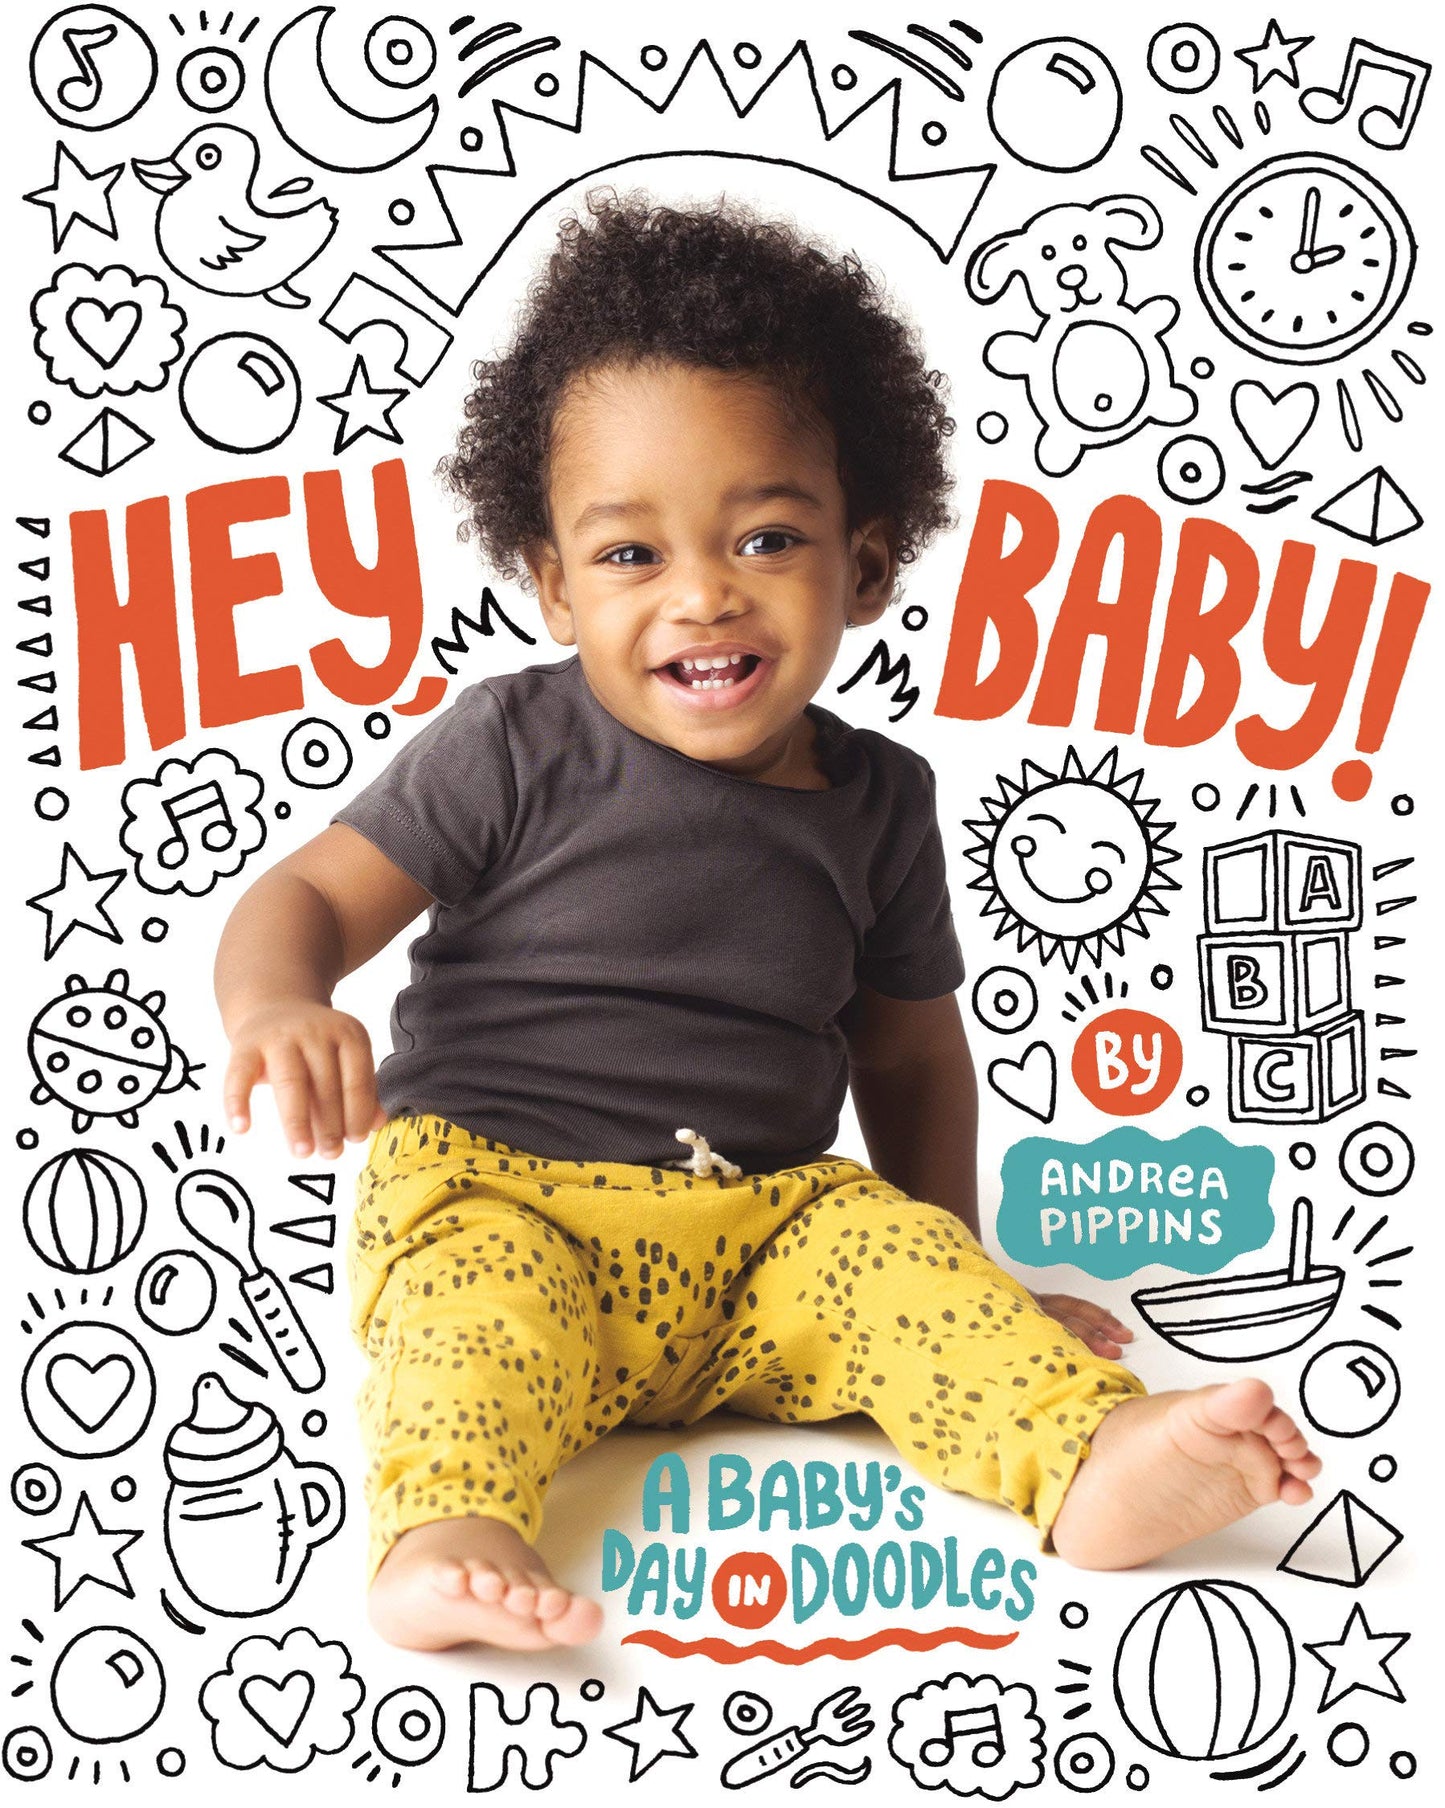 Hey Baby! : A Baby’s Day in Doodles